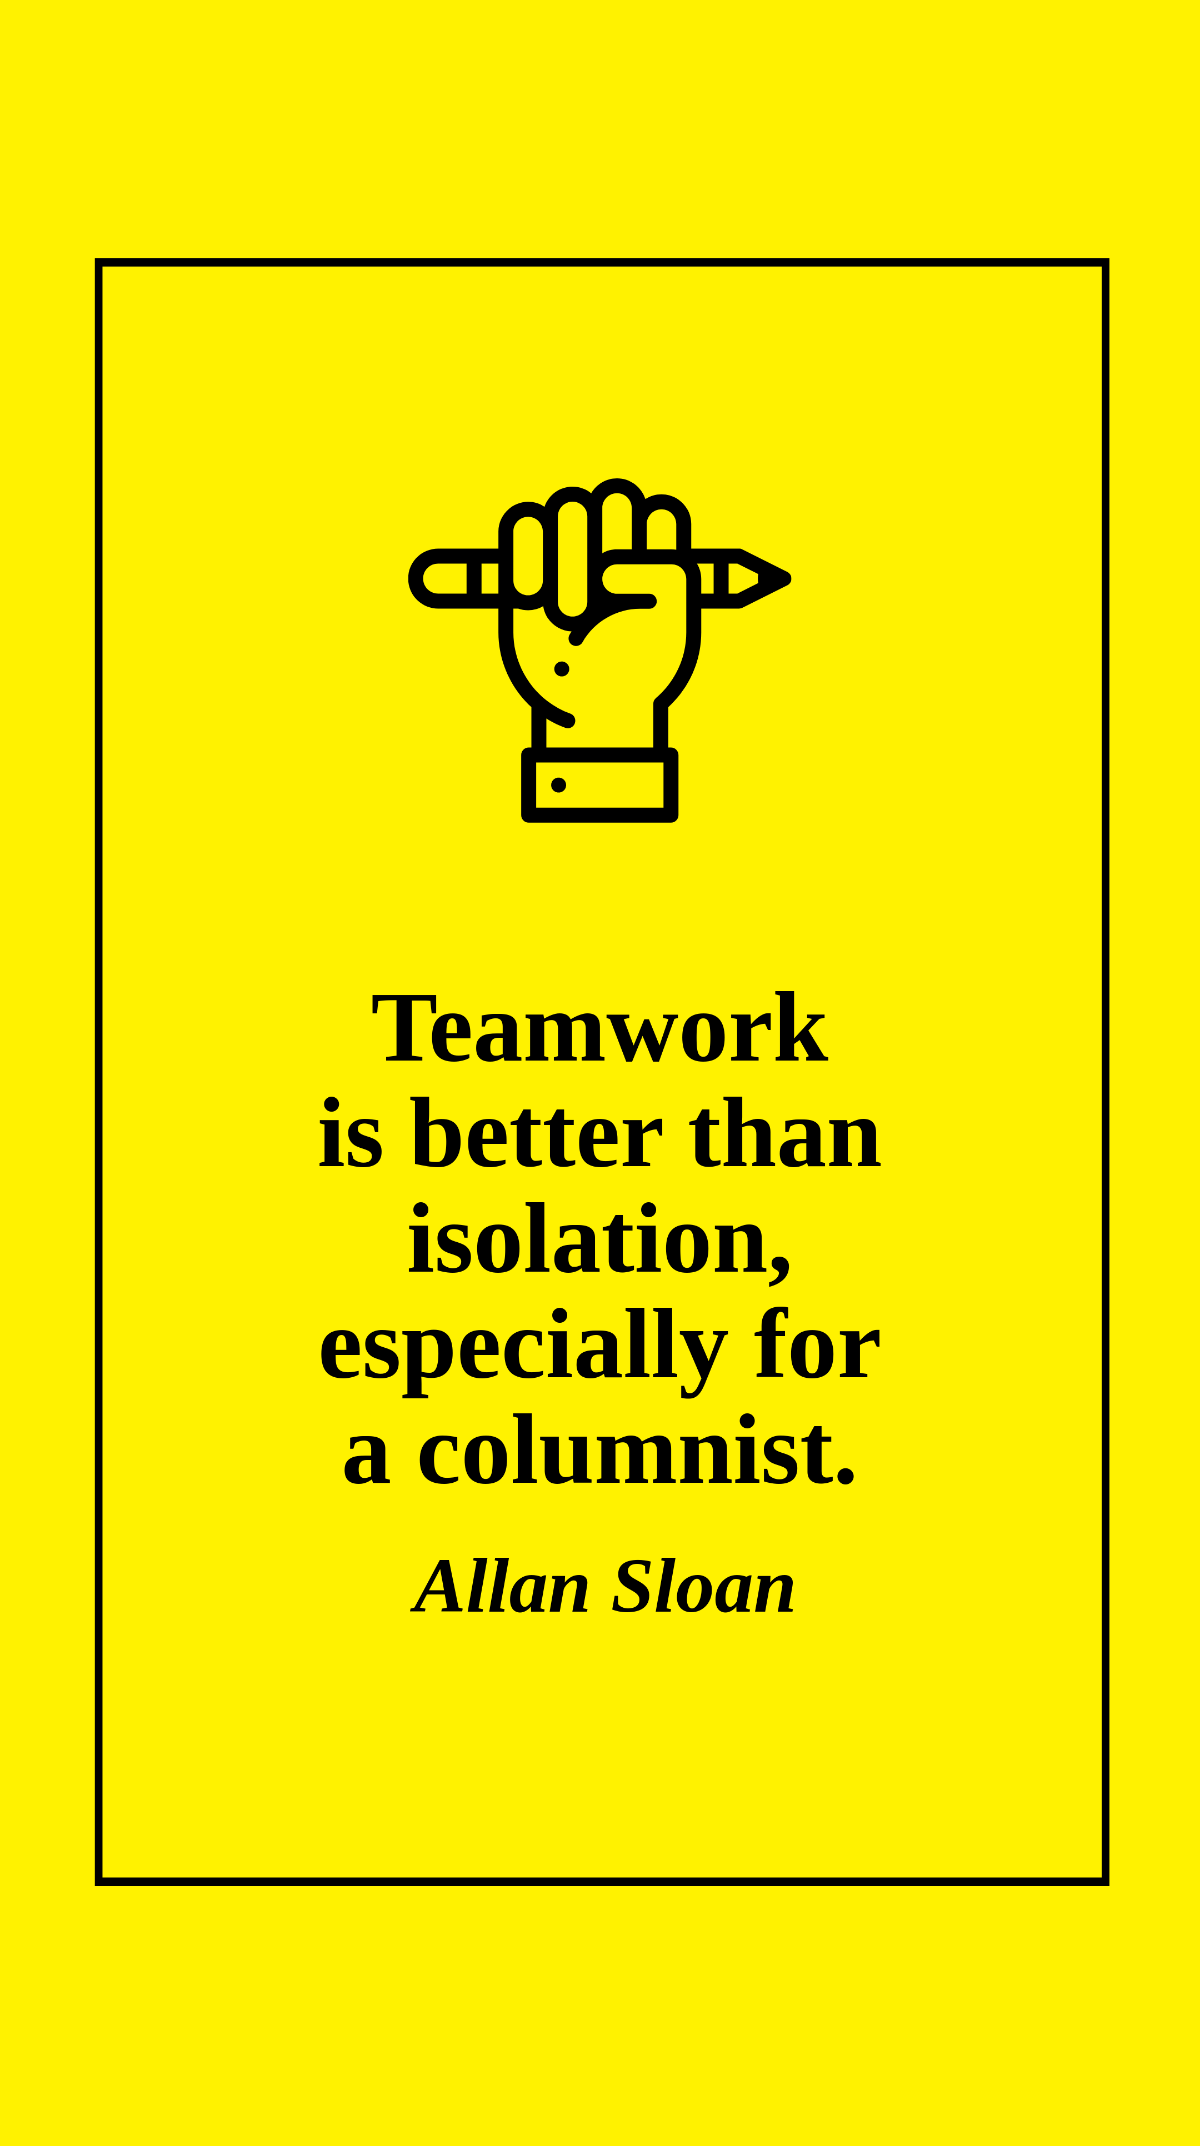 Allan Sloan - Teamwork is better than isolation, especially for a columnist. Template